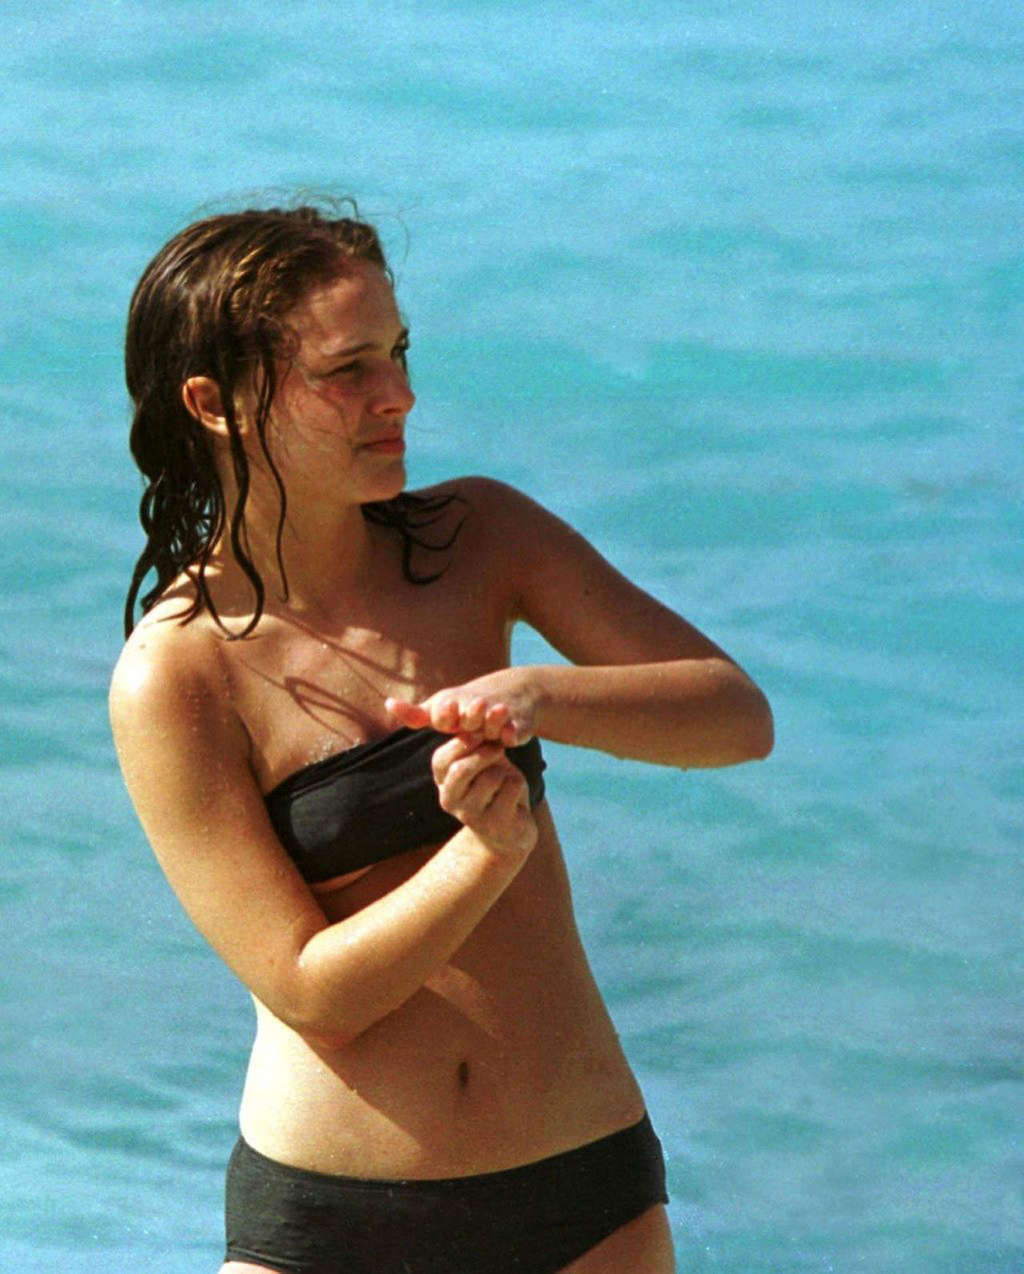 Natalie Portman showing her body in topless on beach #75375591